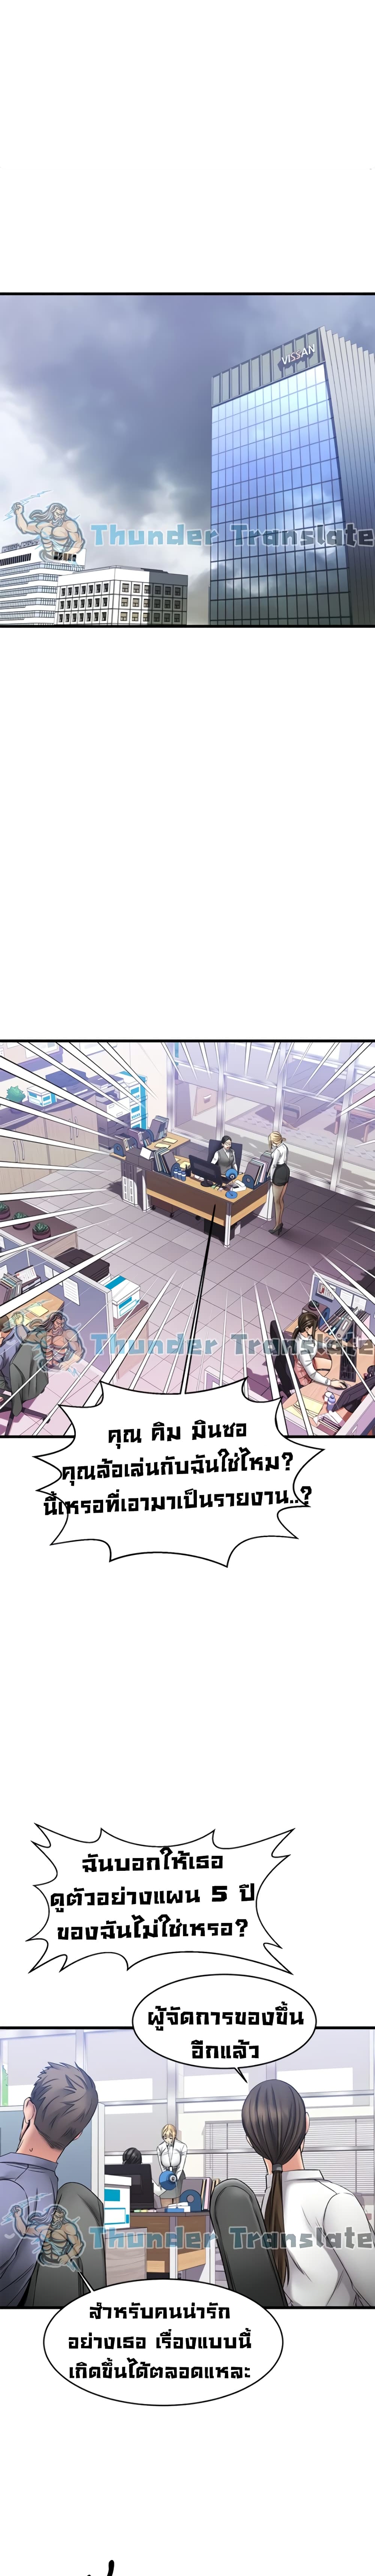 My Female Friend Who Crossed The Line 4 ภาพที่ 15